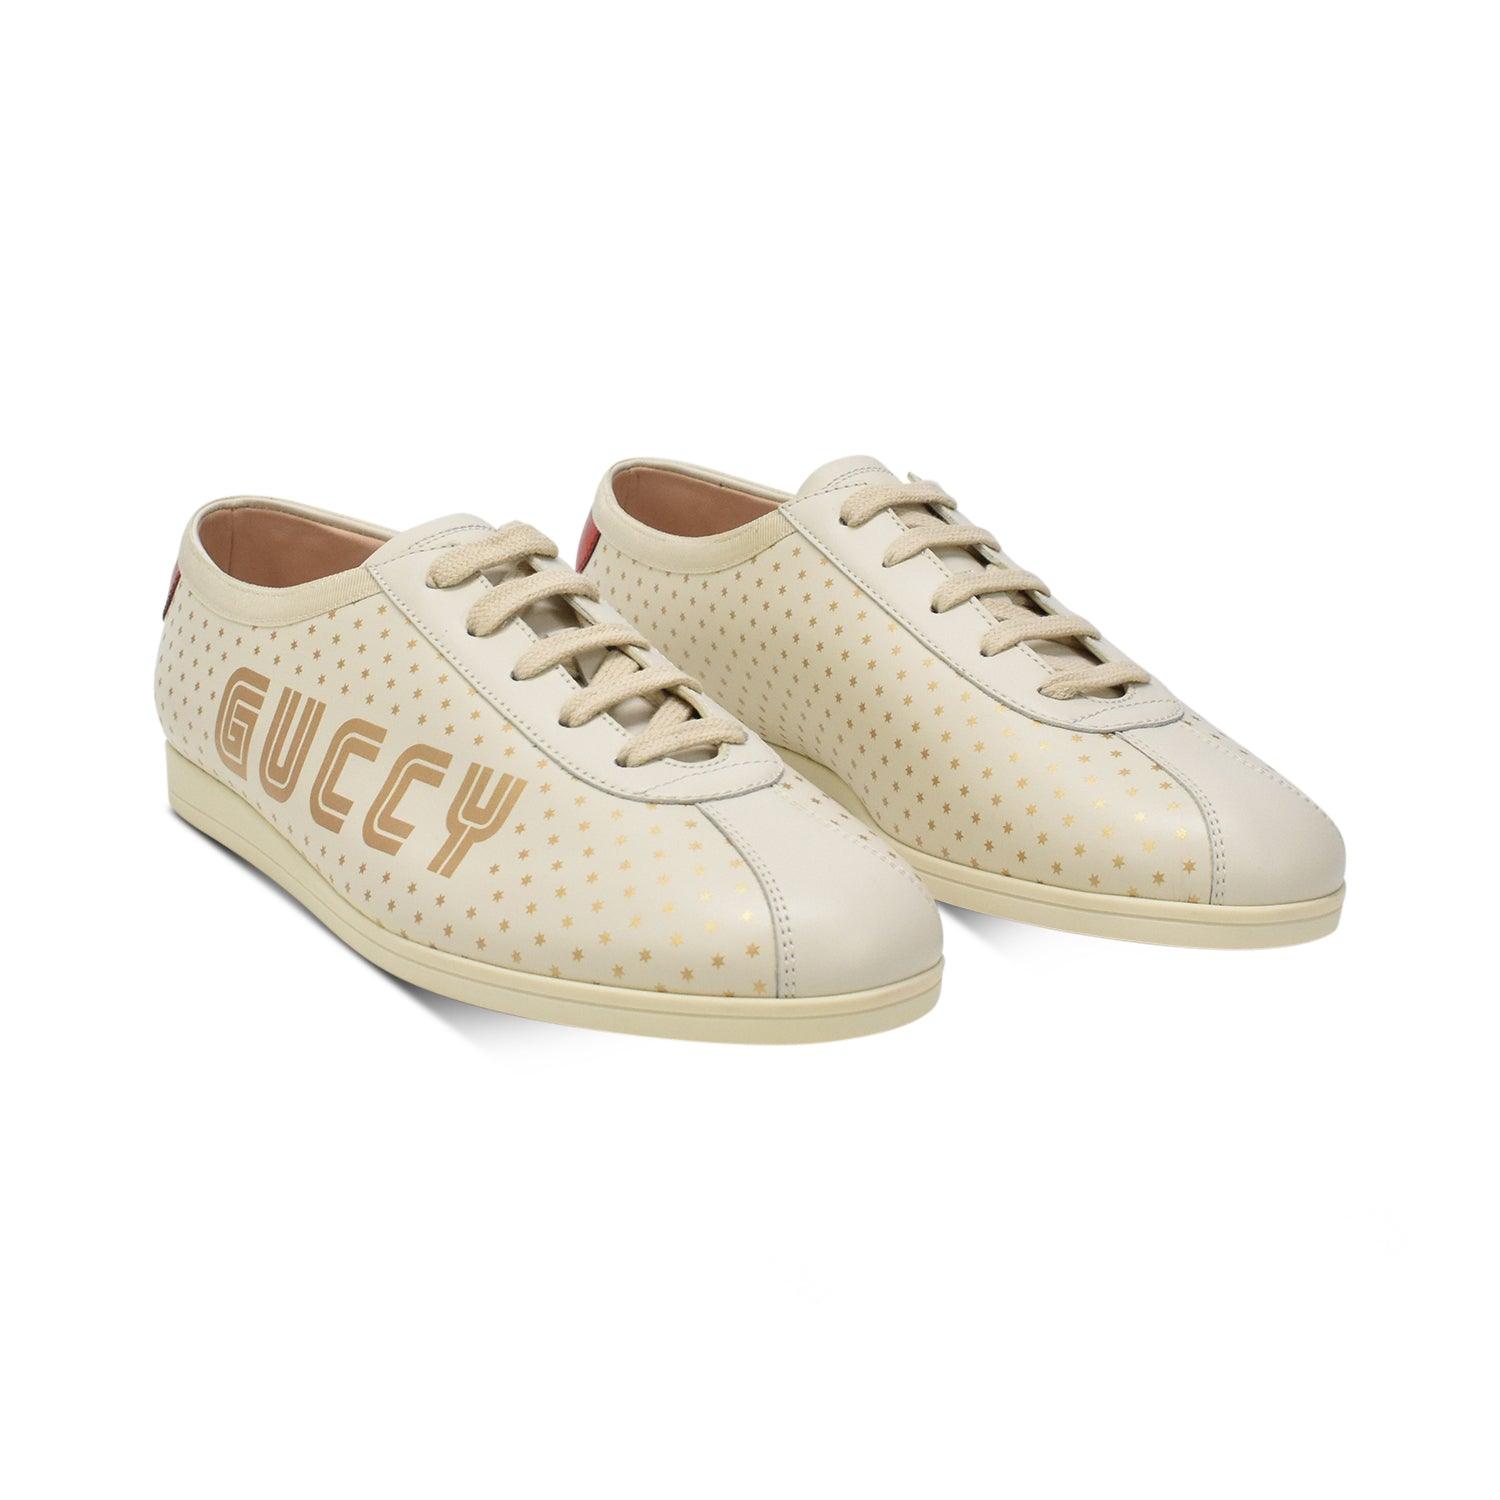 GUCCI CREAM/GOLD Gazelle SIZE 40 Shoes - Fashionably Yours